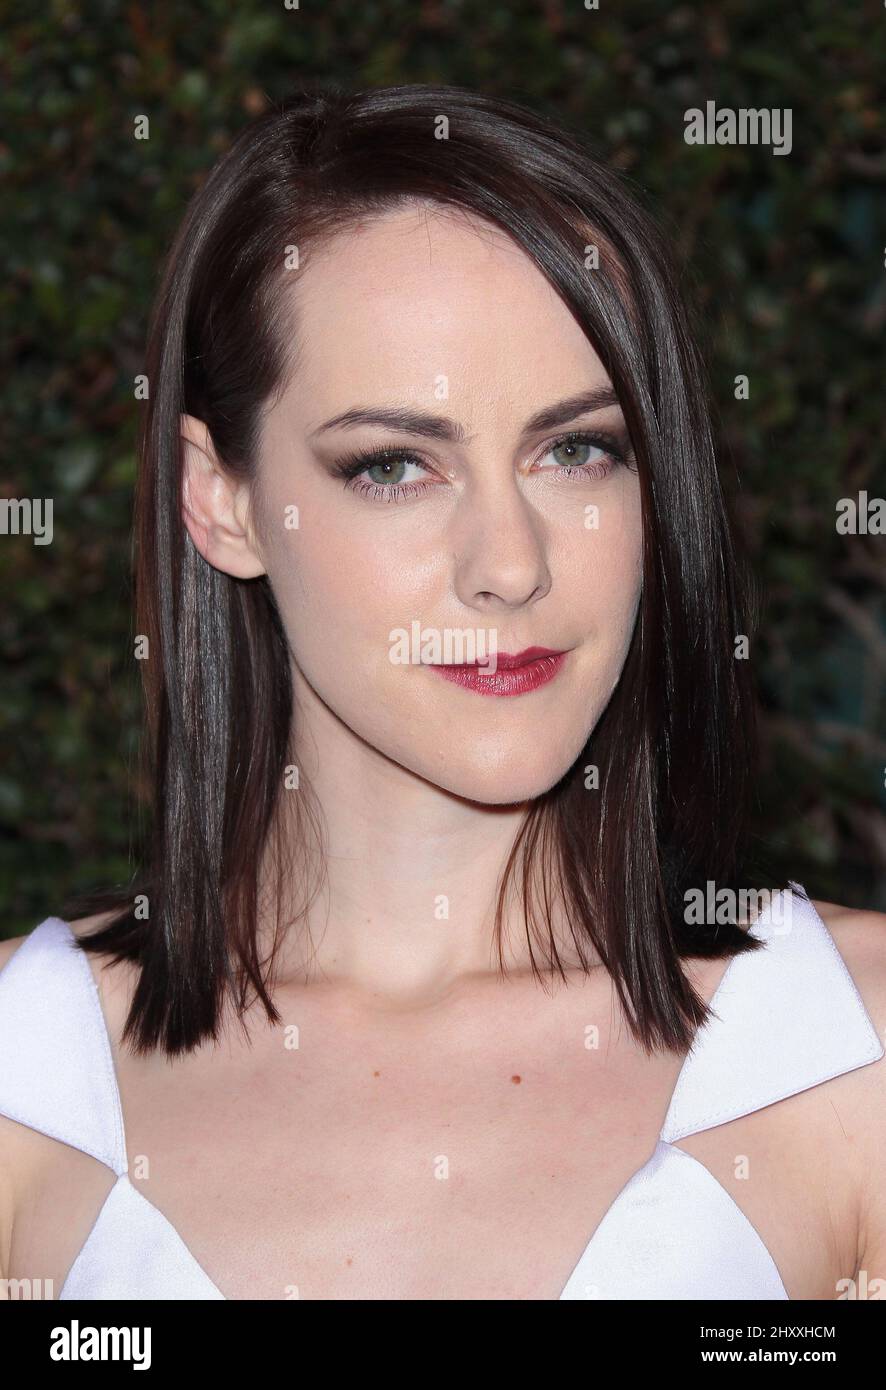 Jena Malone during Vanity Fair And Juicy Couture's 'Vanities' 20th Anniversary Party Supporting All It Takes held at Siren Studios, Hollywood, California Stock Photo